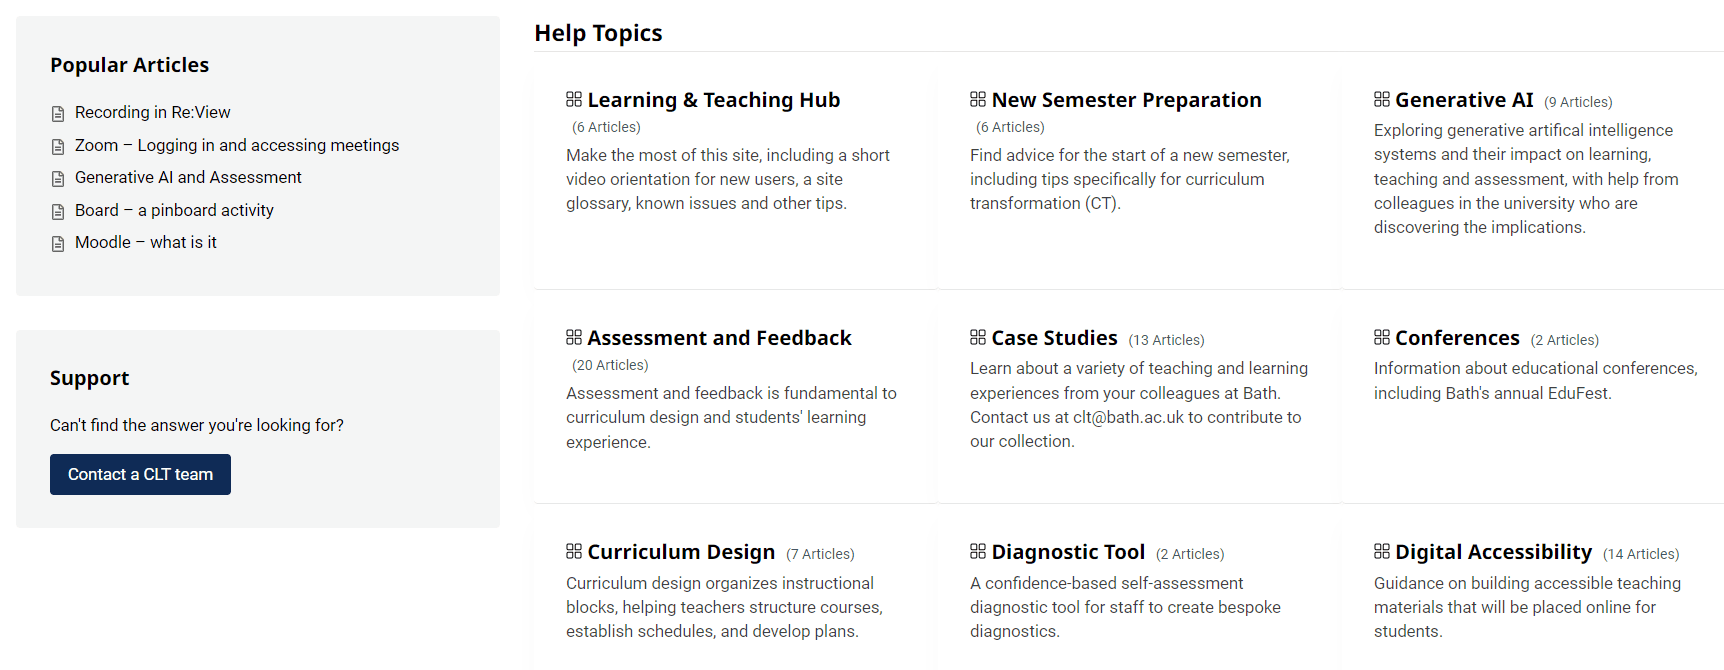 A screenshot of the guidance section of the teaching hub website.